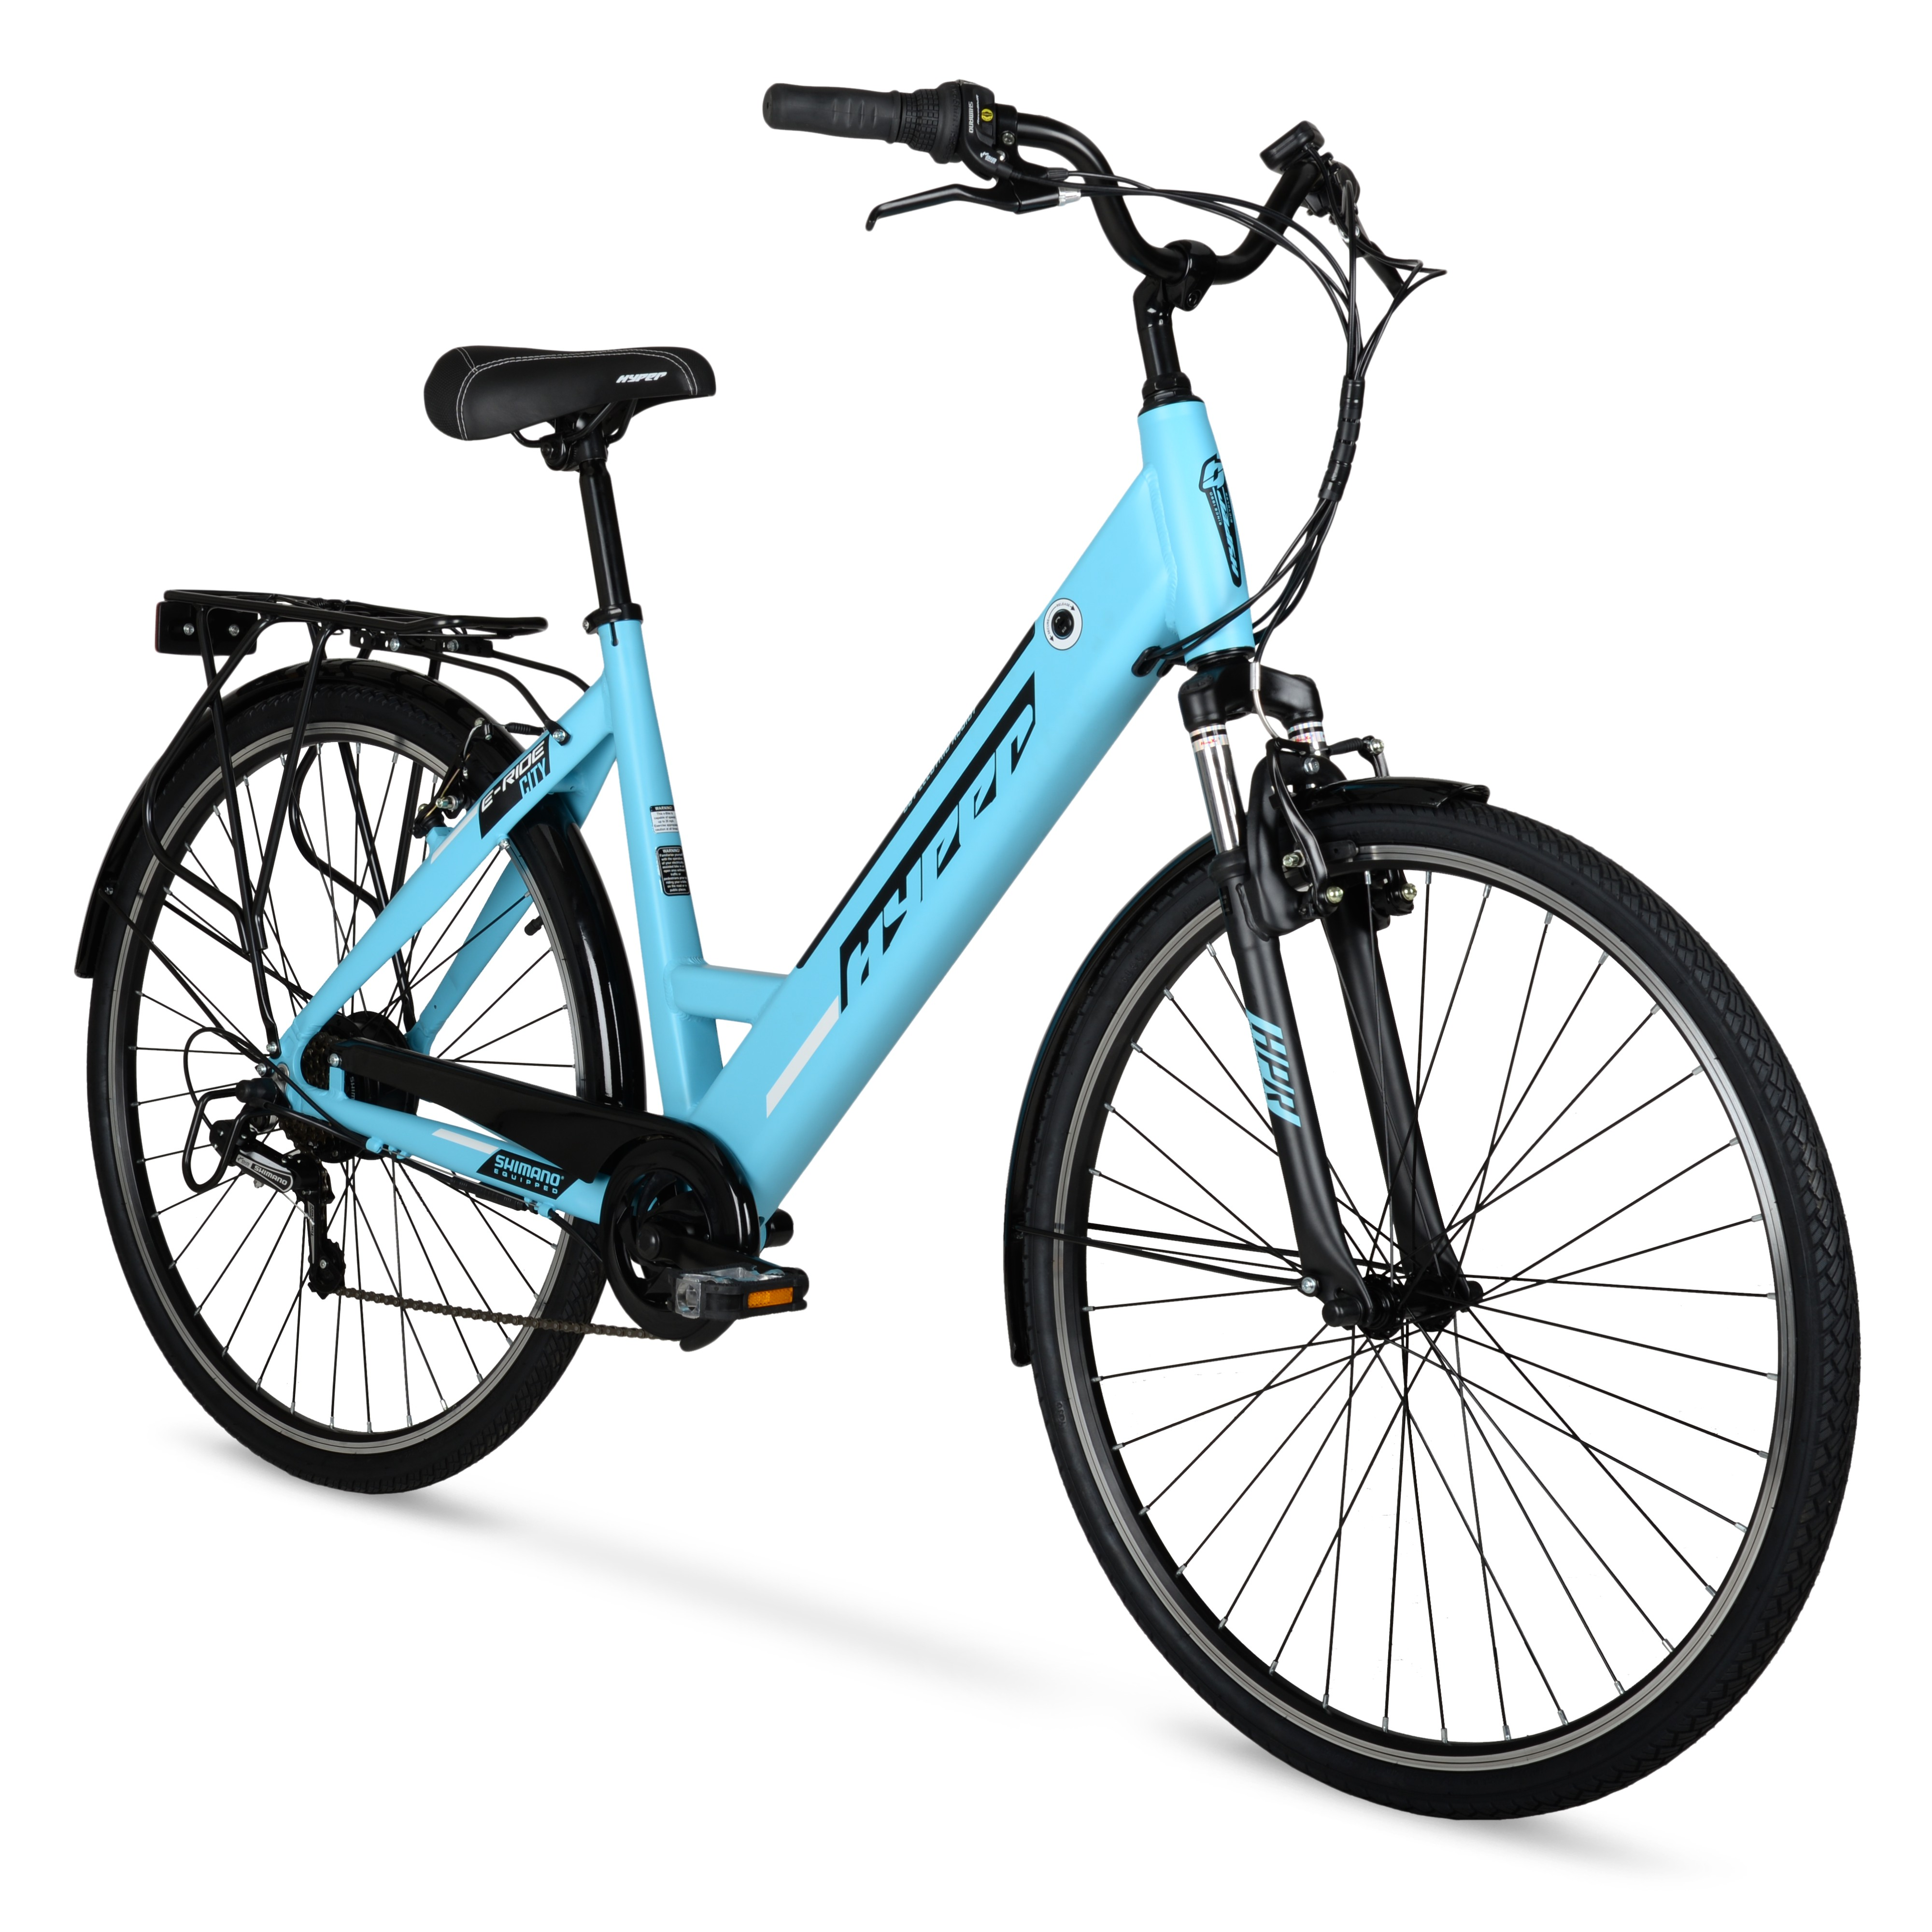 PRICE DROP! - Hyper Bicycles E-Ride Electric Pedal Assist Mountain or Commuter Bike